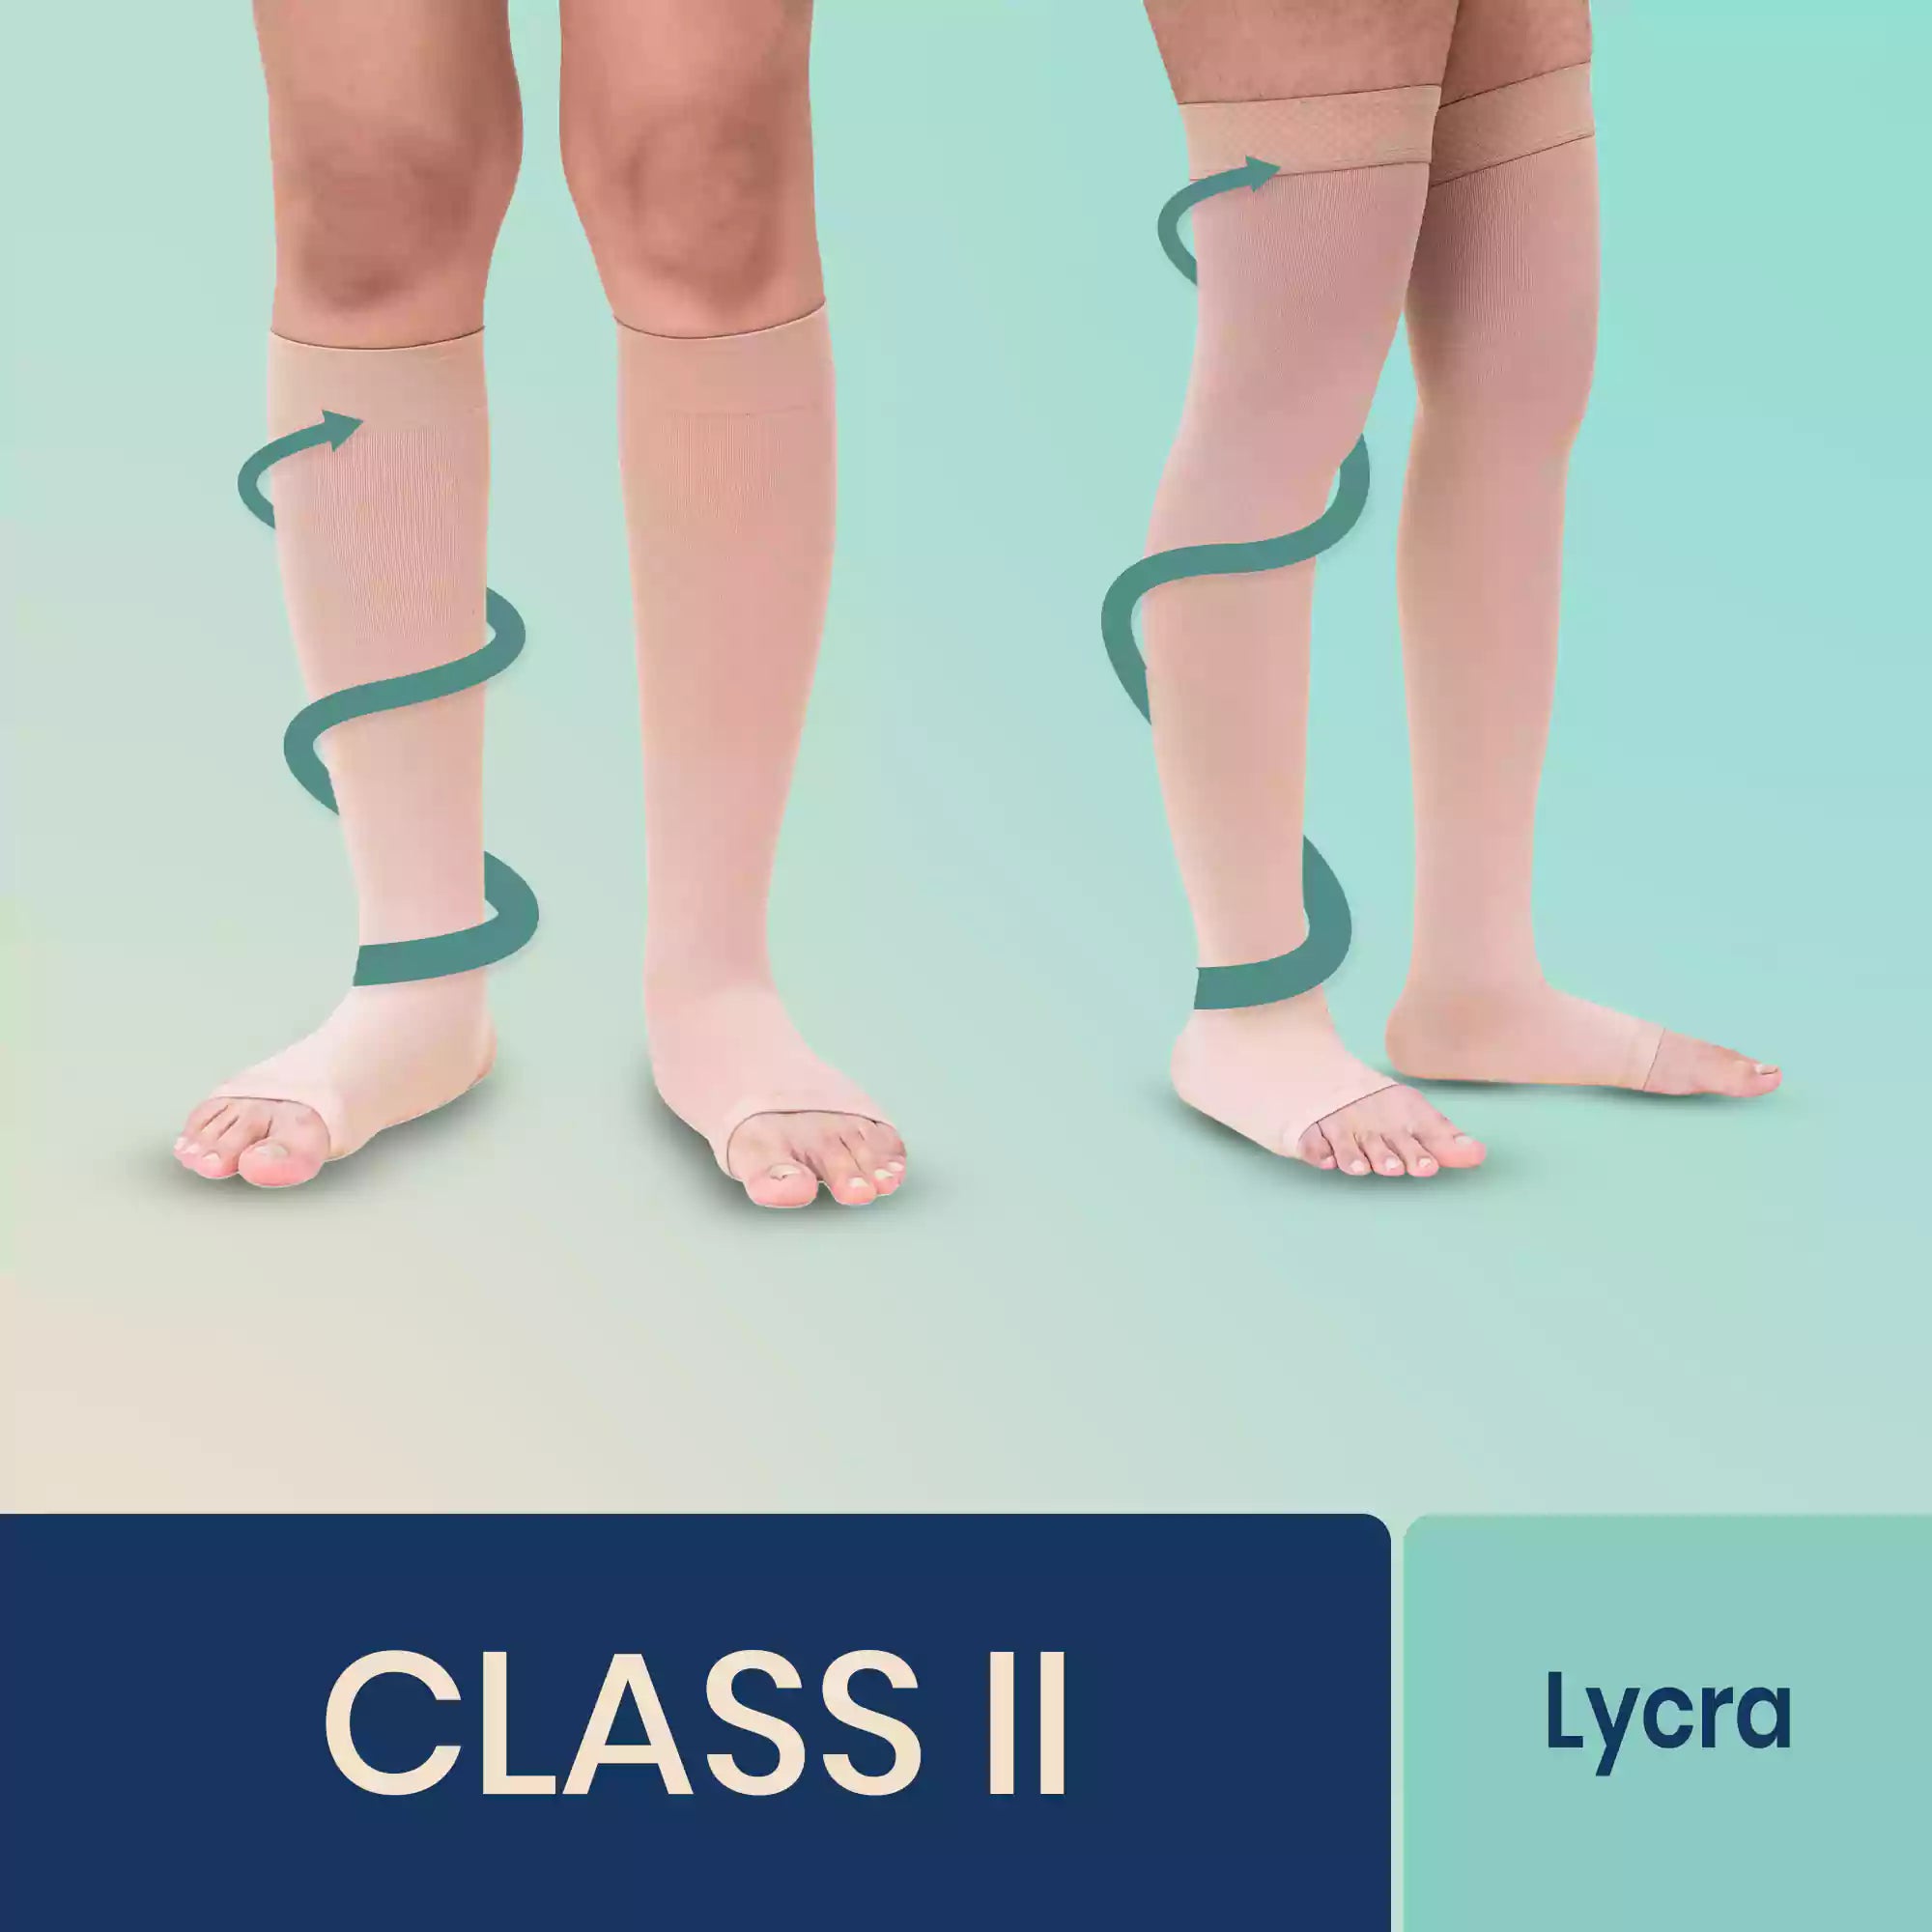 class 2 stockings - compression stockings for varicose veins